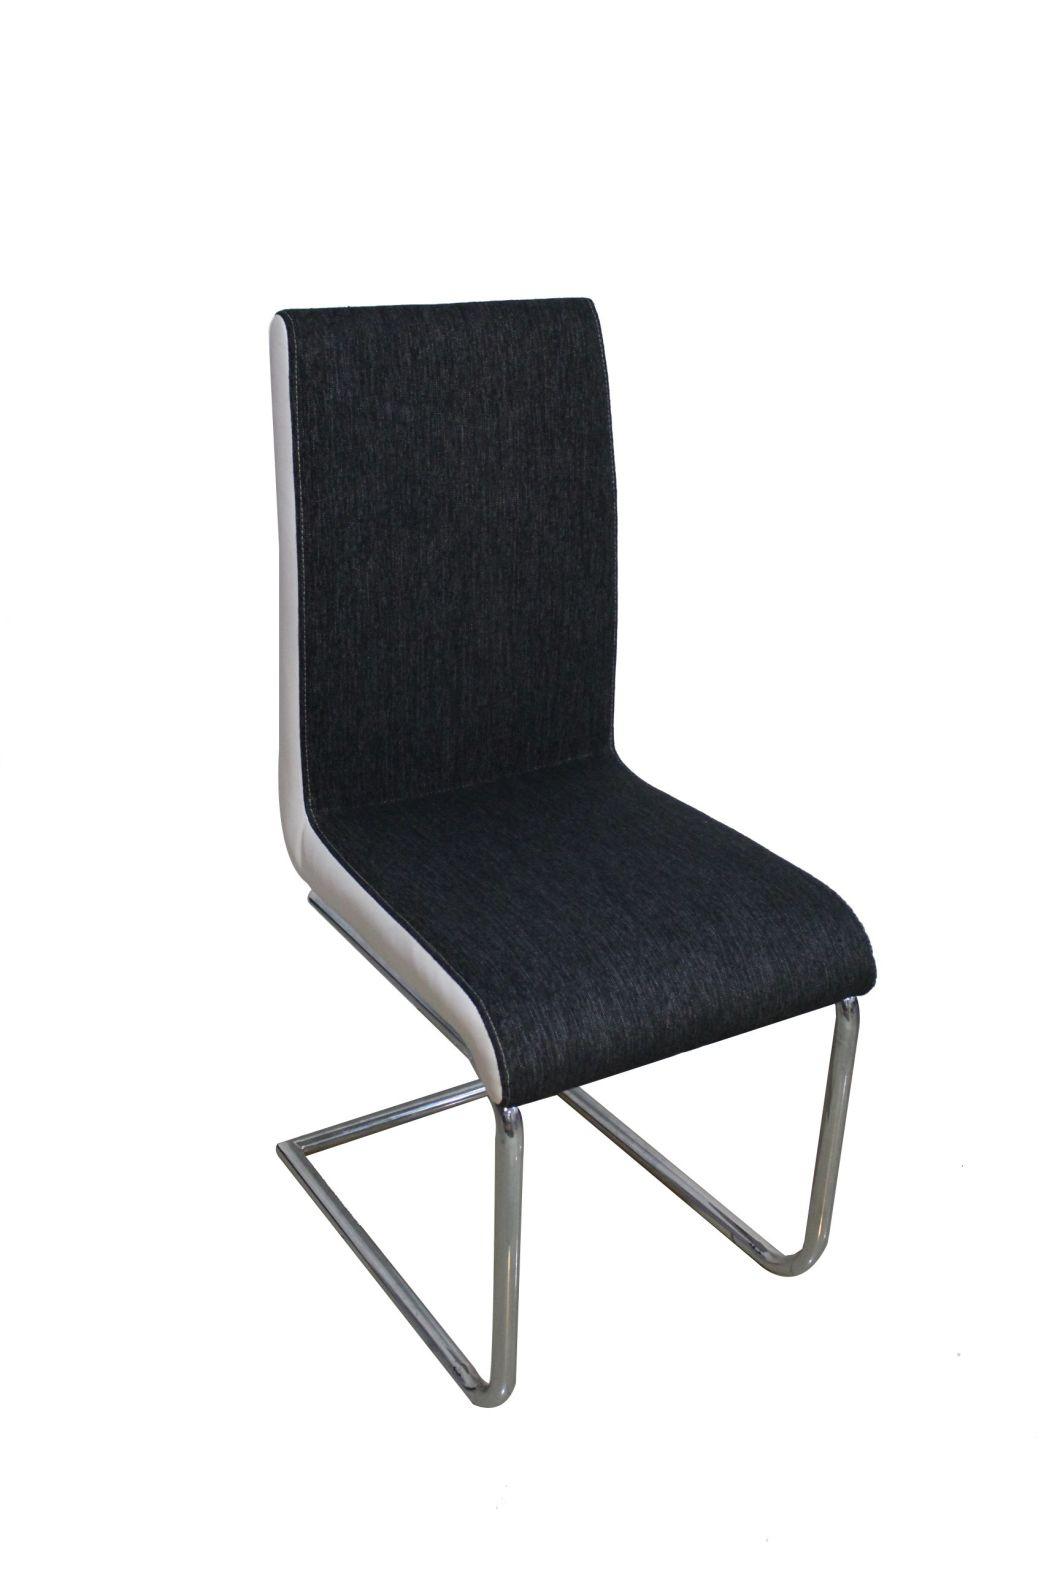 Modern Home Office Dining Room Furniture Fabric PU Back and Seat Dining Chair